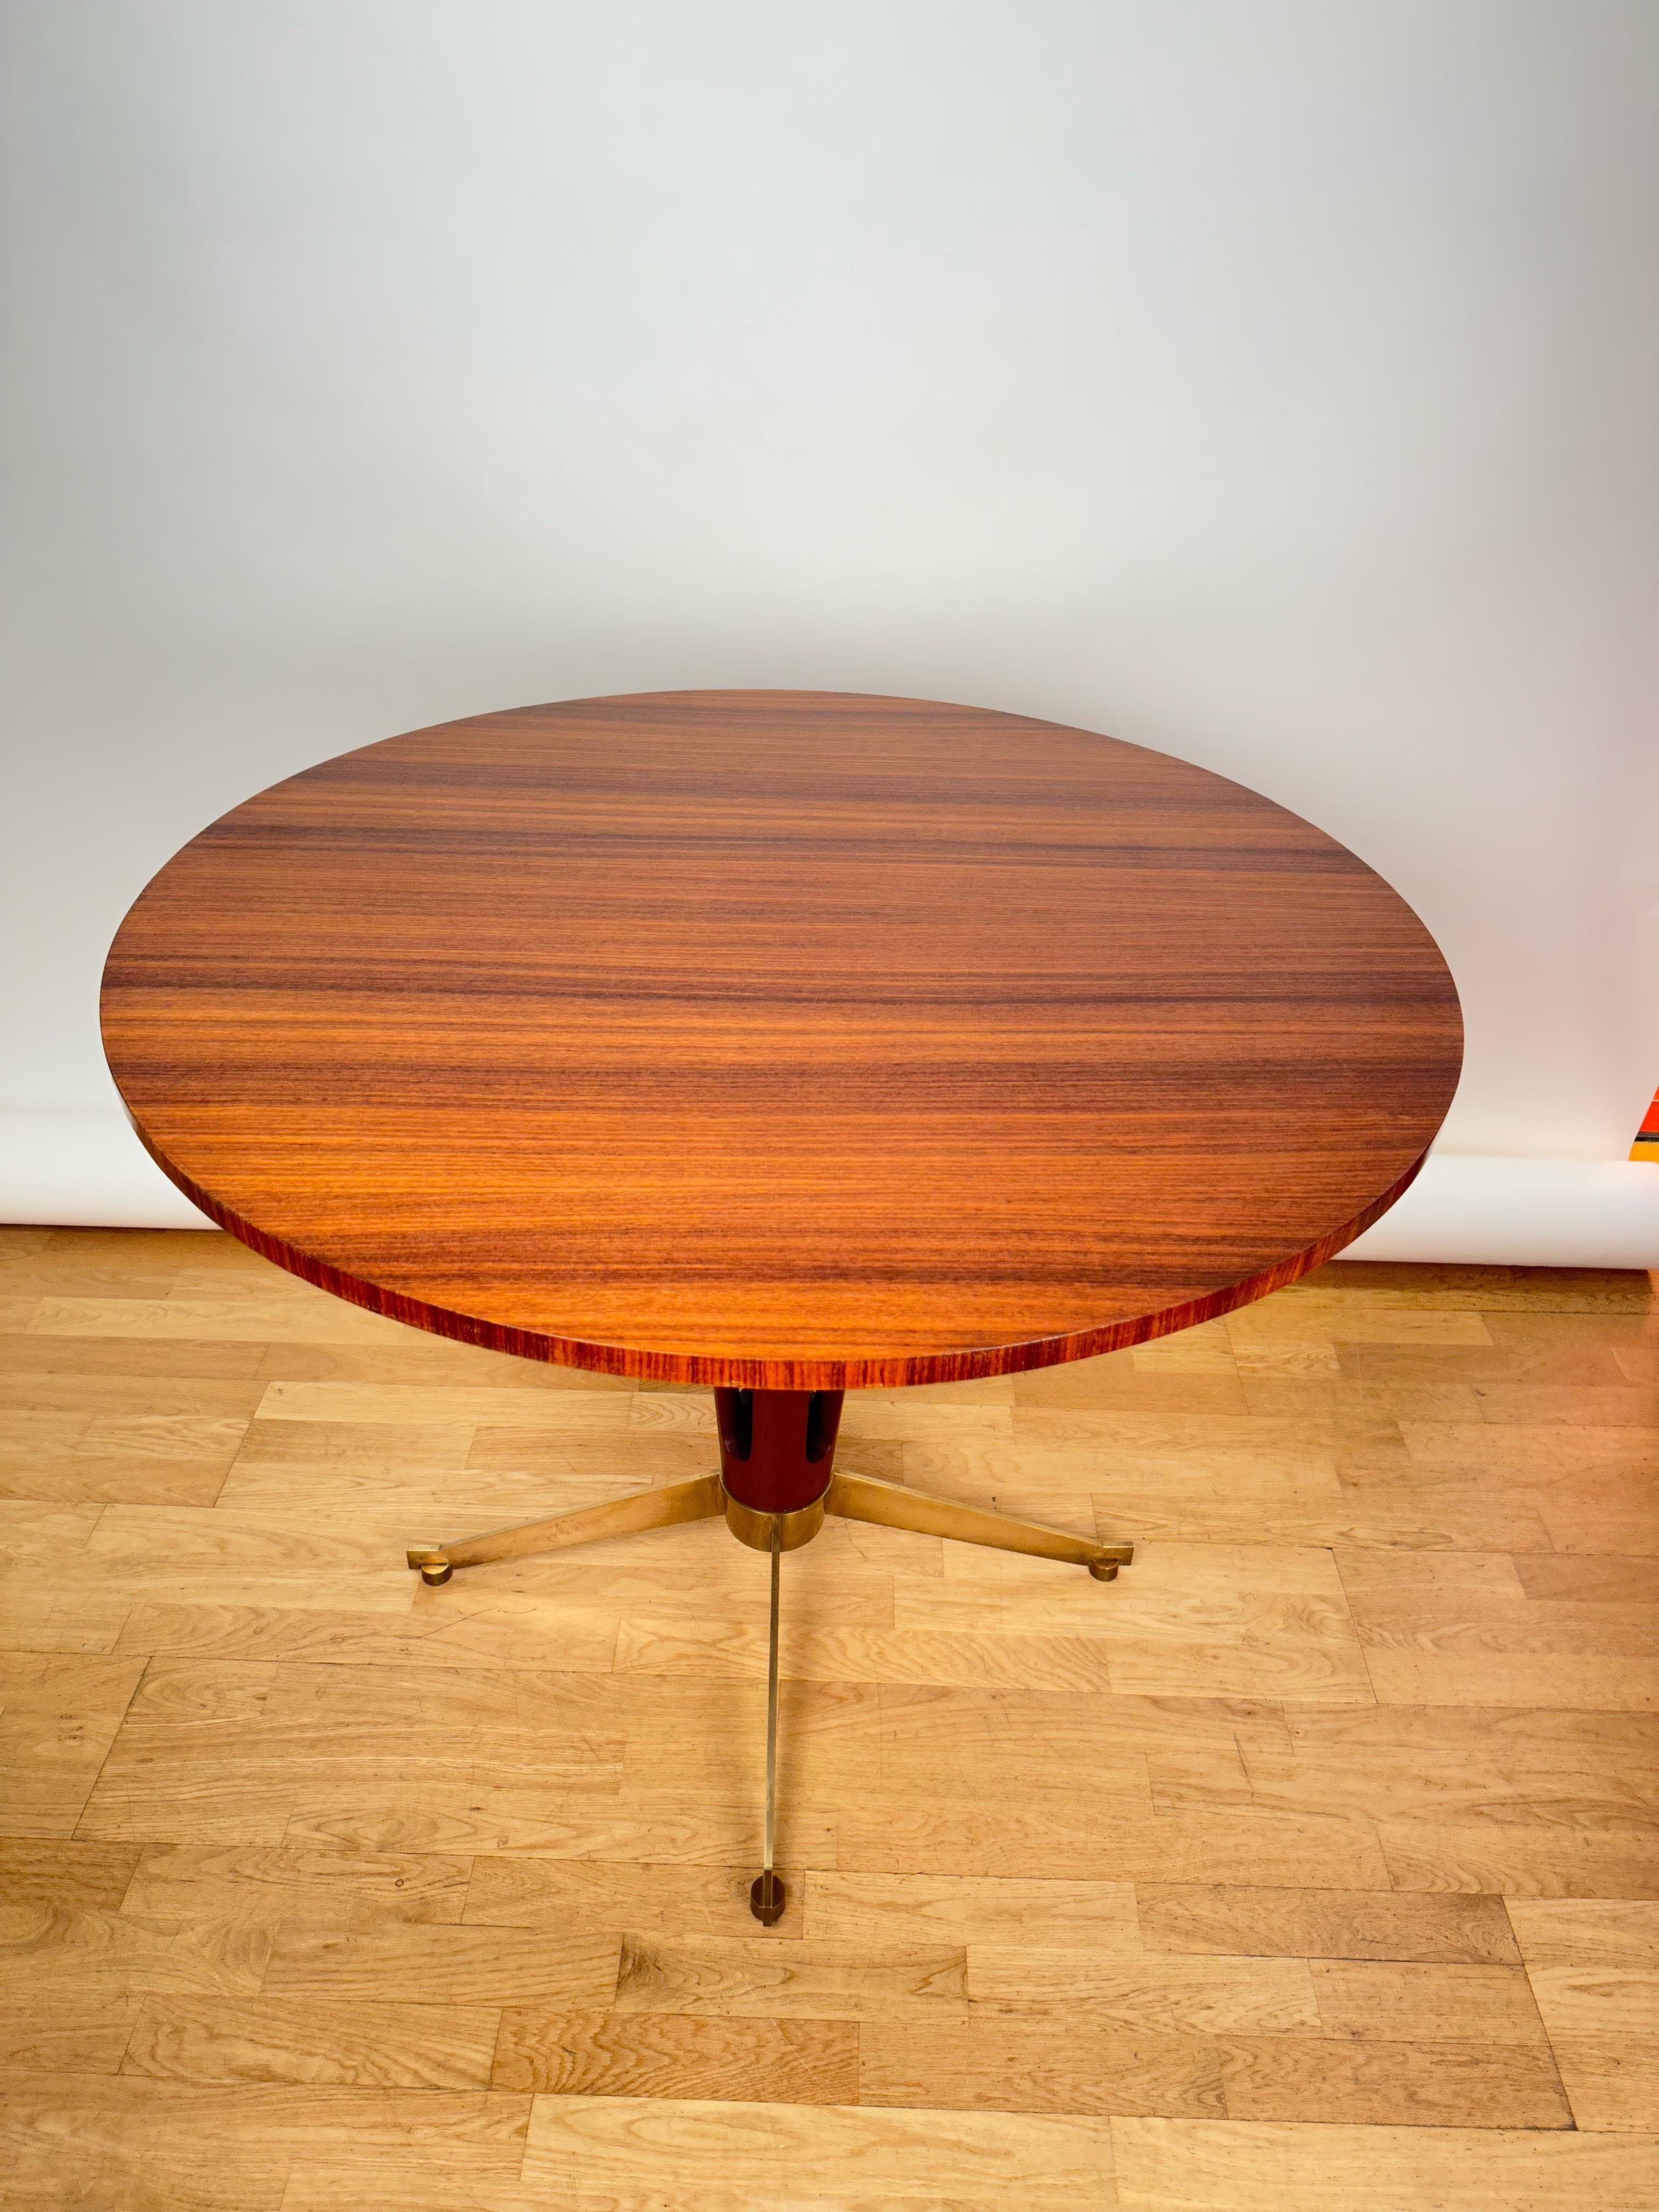 Italian Midcentury Circular Rosewood ans Brass Dining Table.1960 For Sale 3